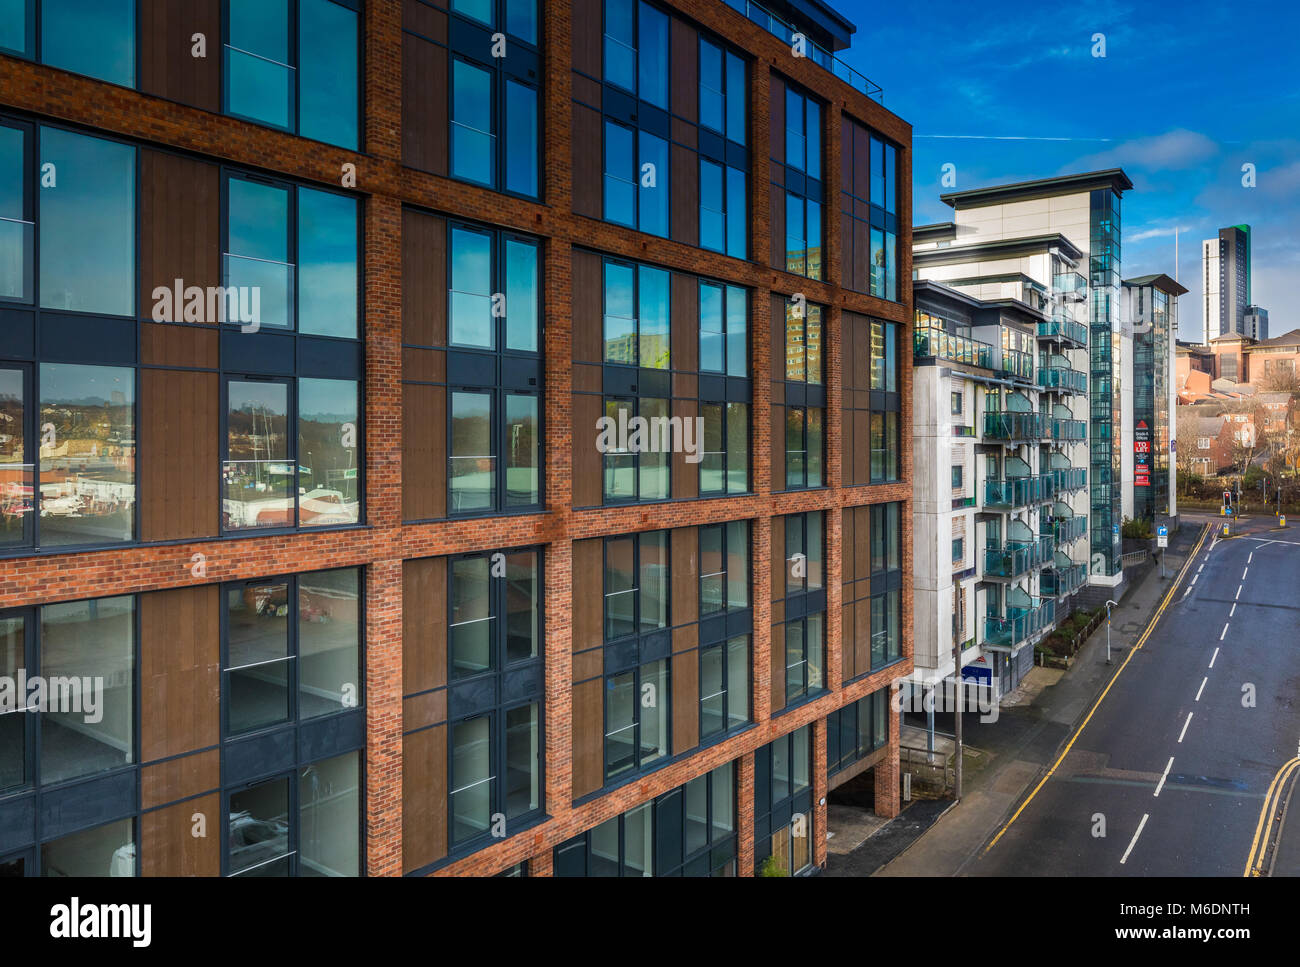 New Property Development Projects On Skinner Lane Leeds. Changing The Leeds Skyline. Stock Photo